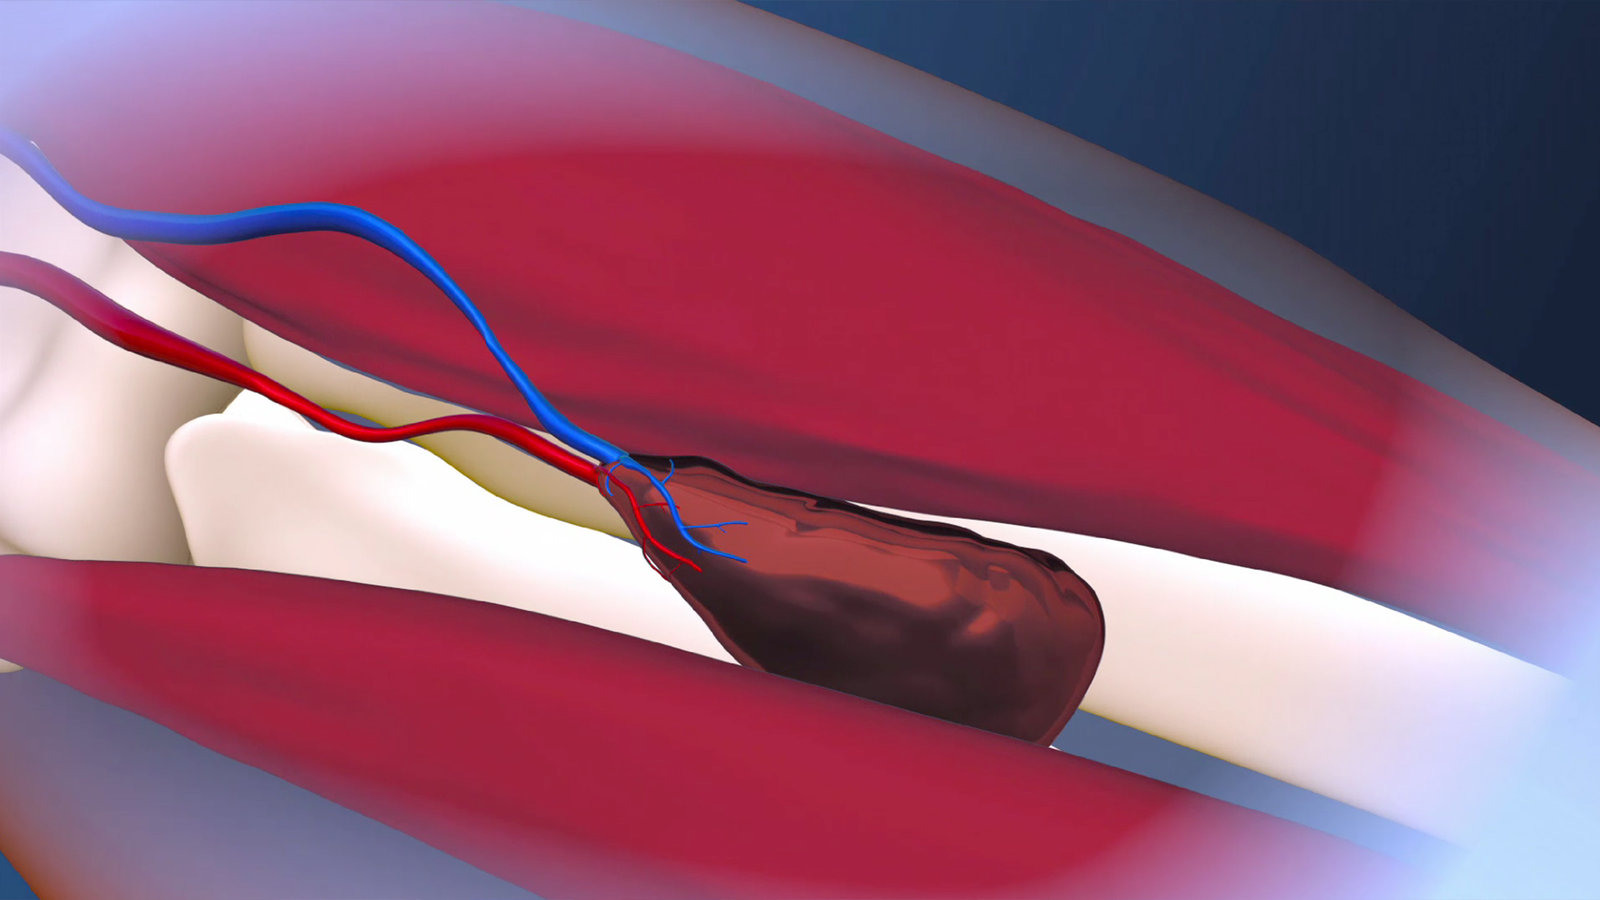 Still from an animation I created showing a new surgical technique